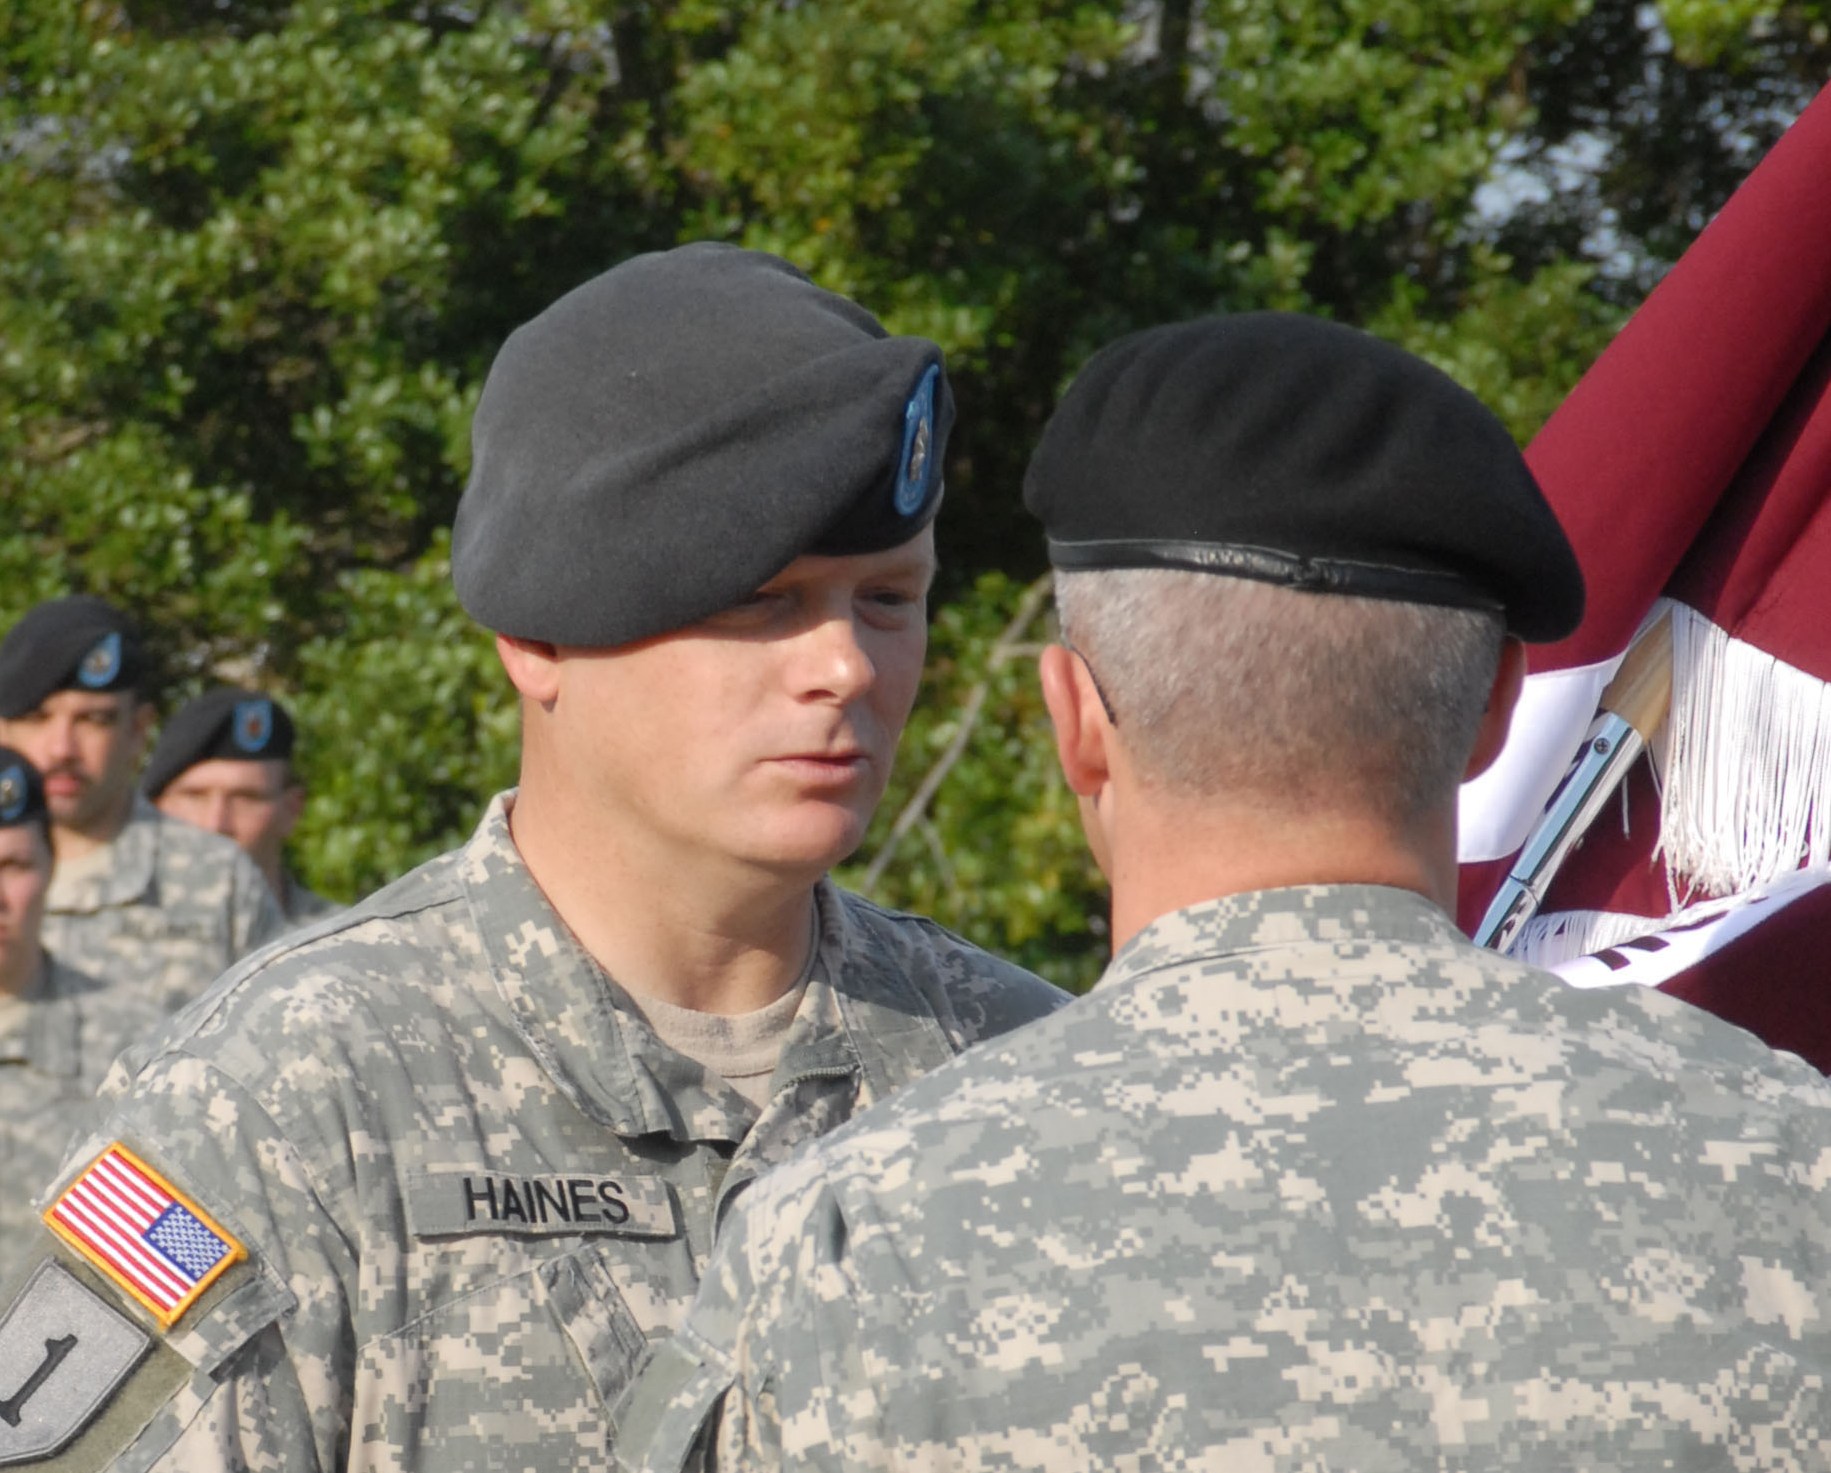 In April 2010, LTC David Haines (left) accepted the Warrior Transition Battalion’s flag from COL Ronald Place (right), MEDDAC Commander at Fort Knox’s Ireland Army Community Hospital. (Photo courtesy of Army.mil)